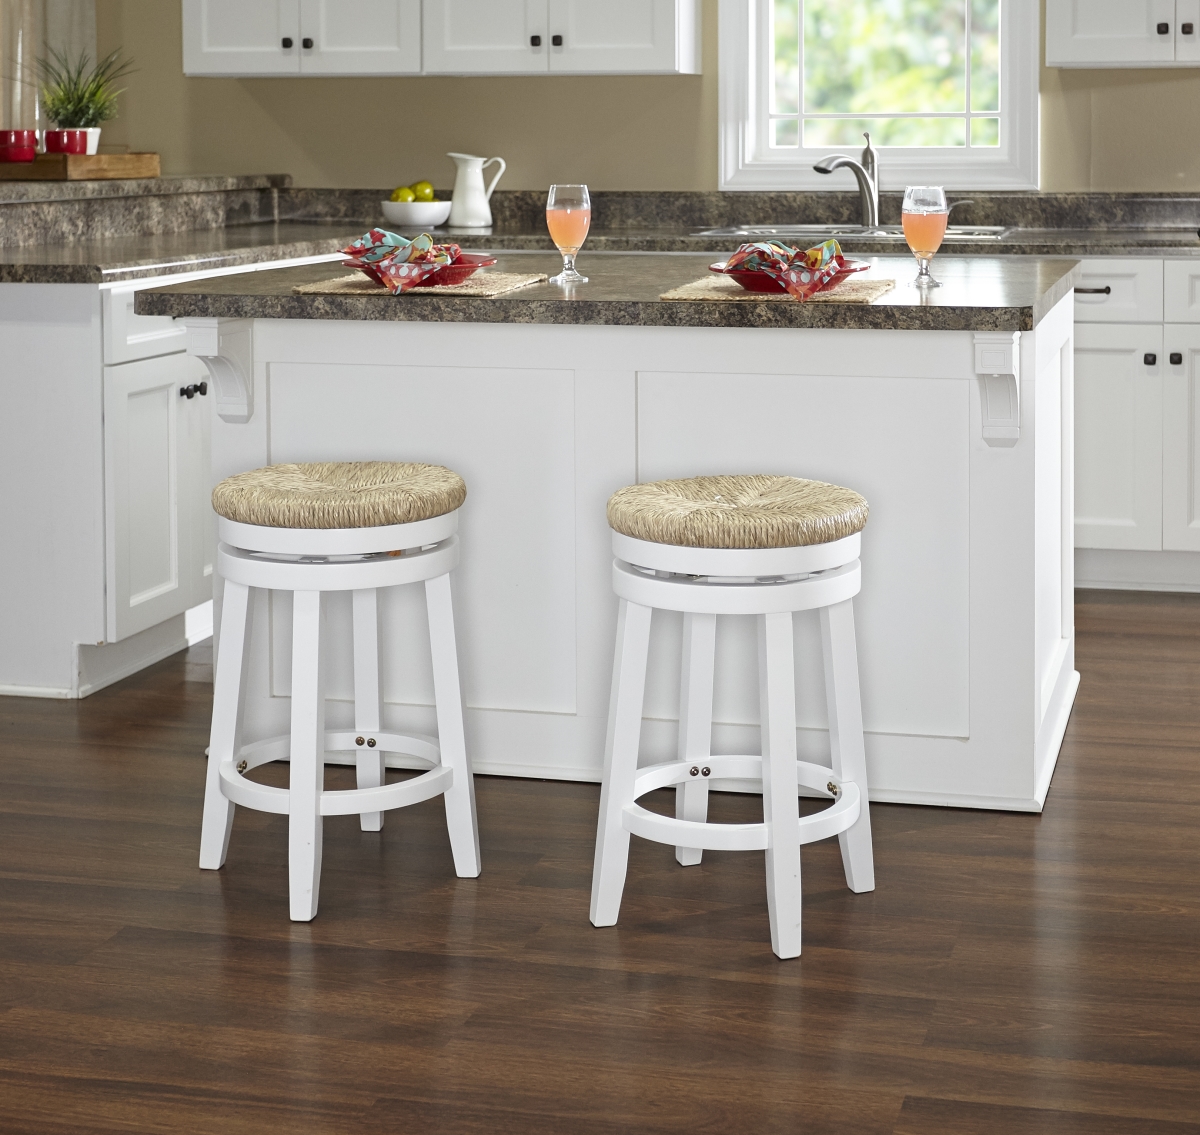 Picture of Powell D1124B17BS 31.63 x 19 x 19 in. Morgan Barstool - White